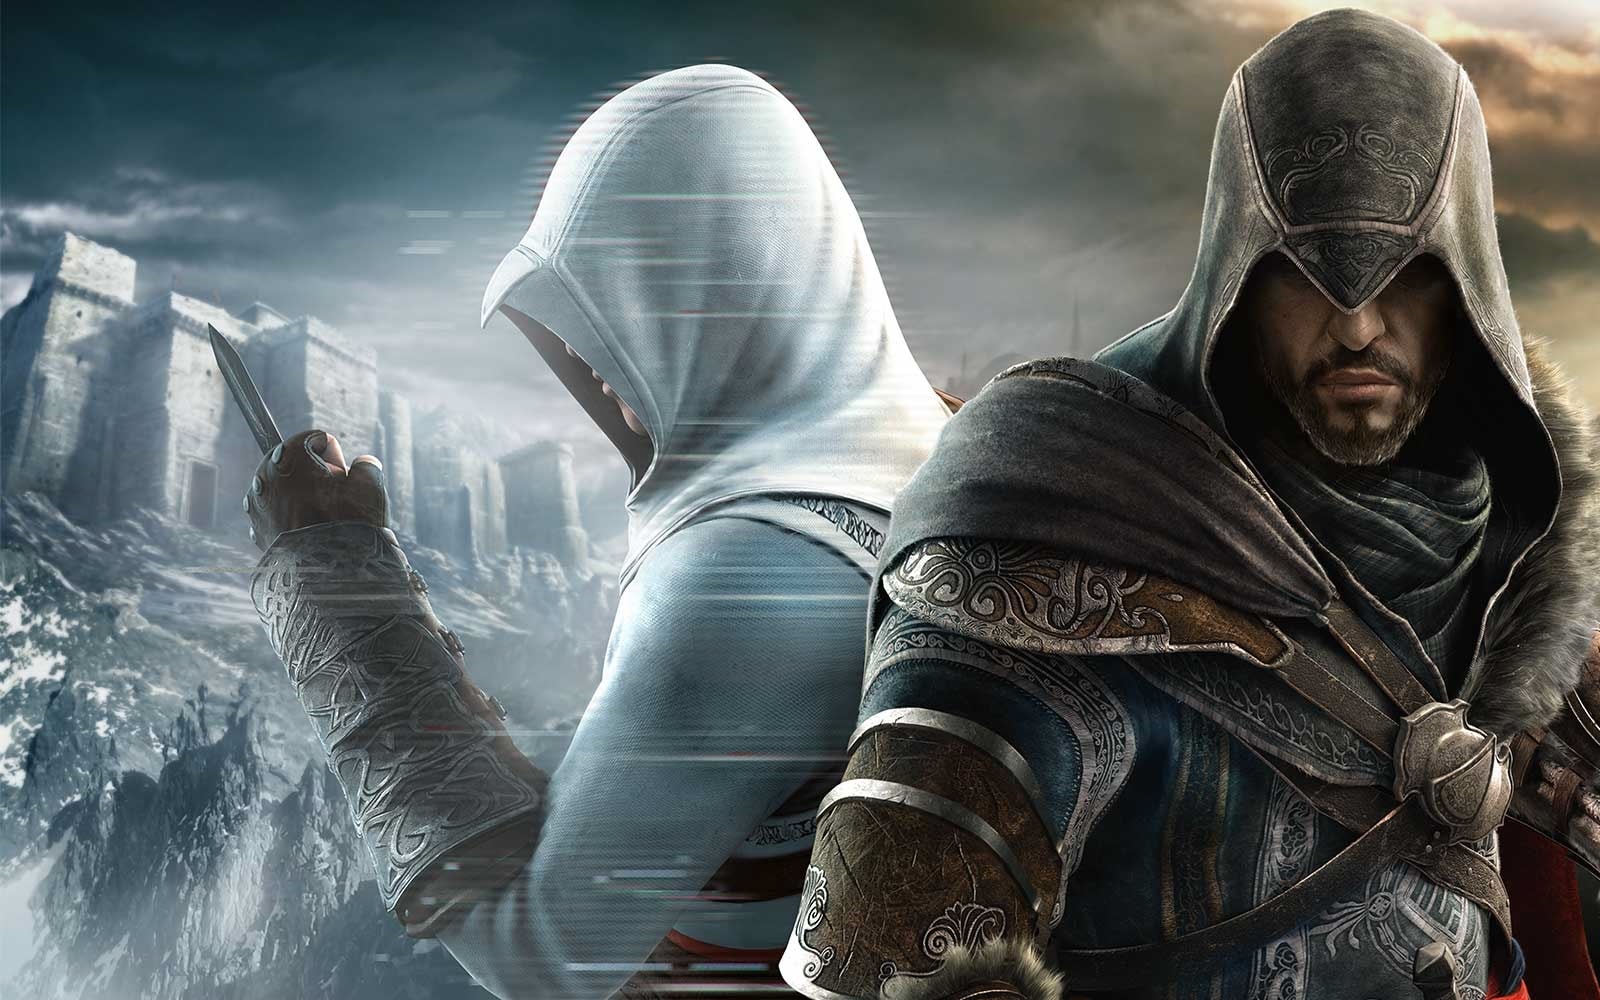 Assassin's Creed: Revelations - Download